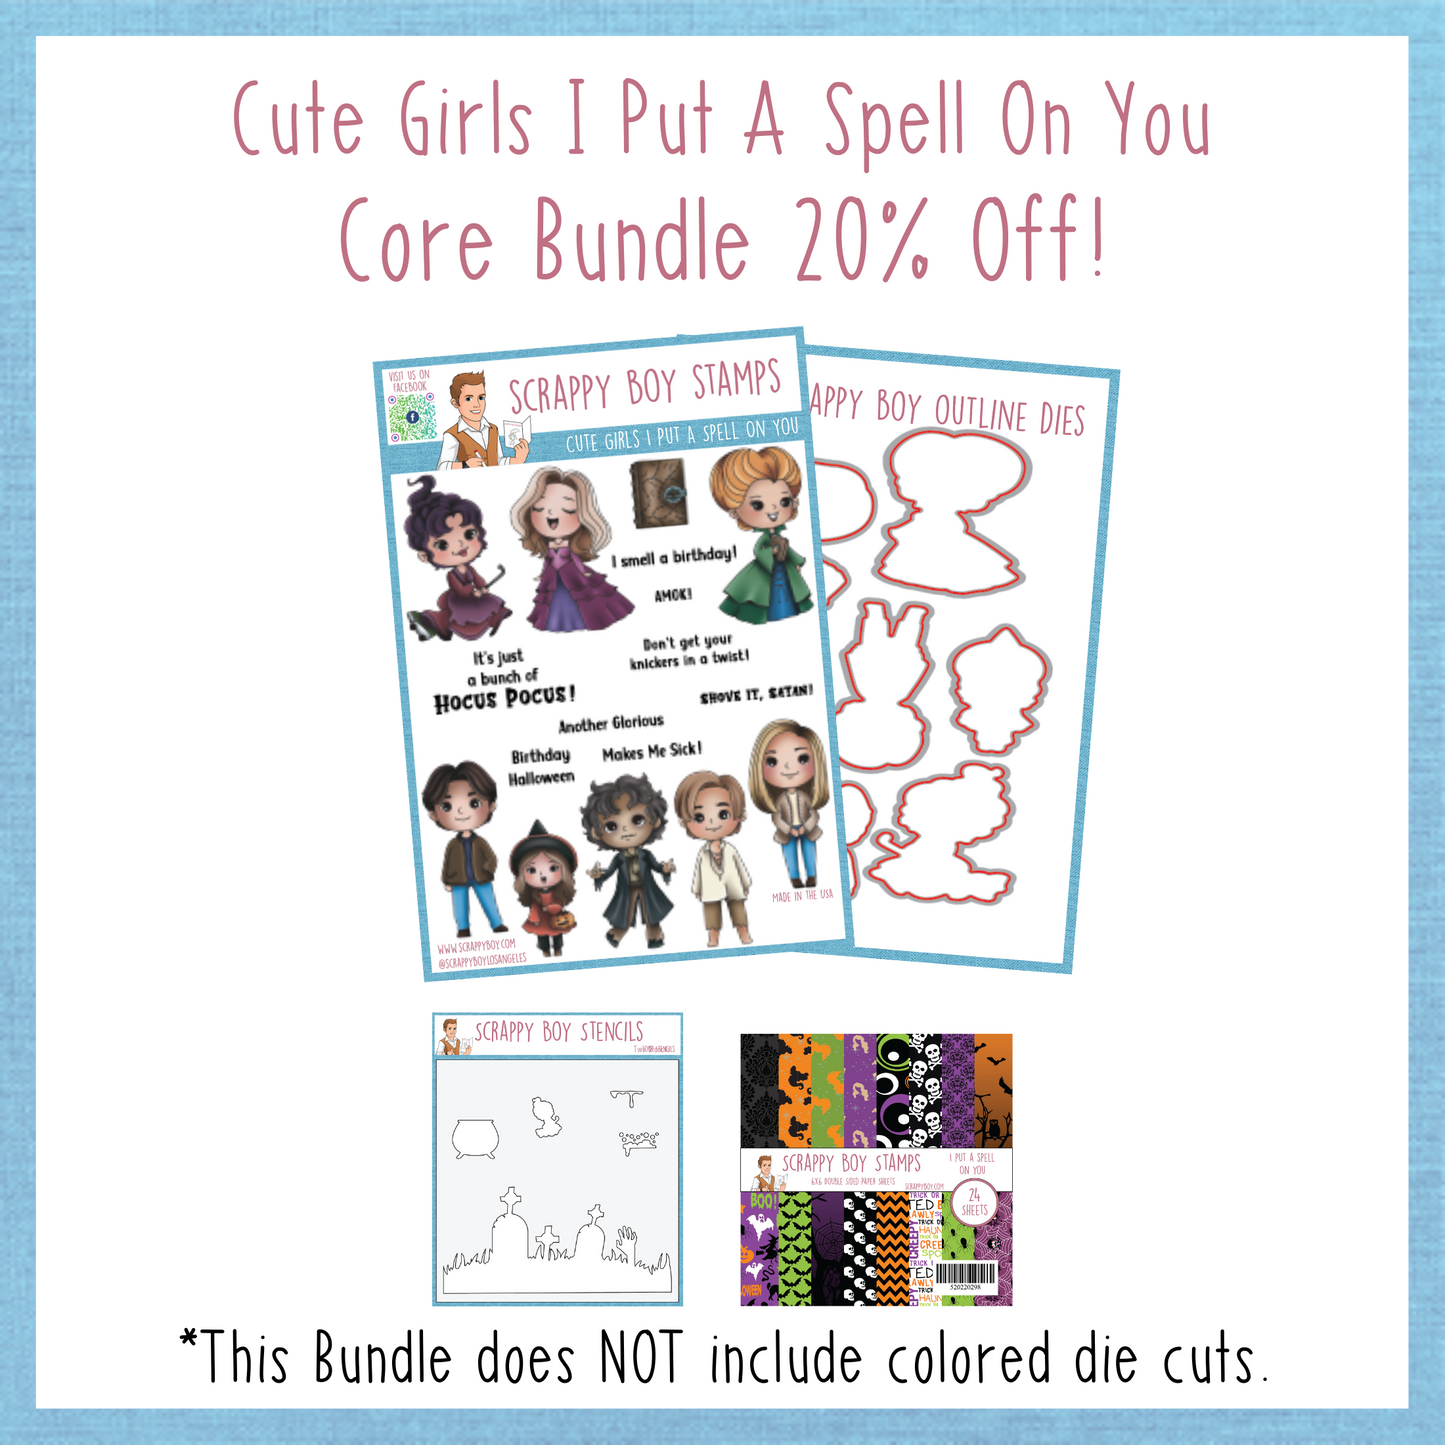 Core Bundle - I Put A Spell On You Release Scrappy Boy Stamps